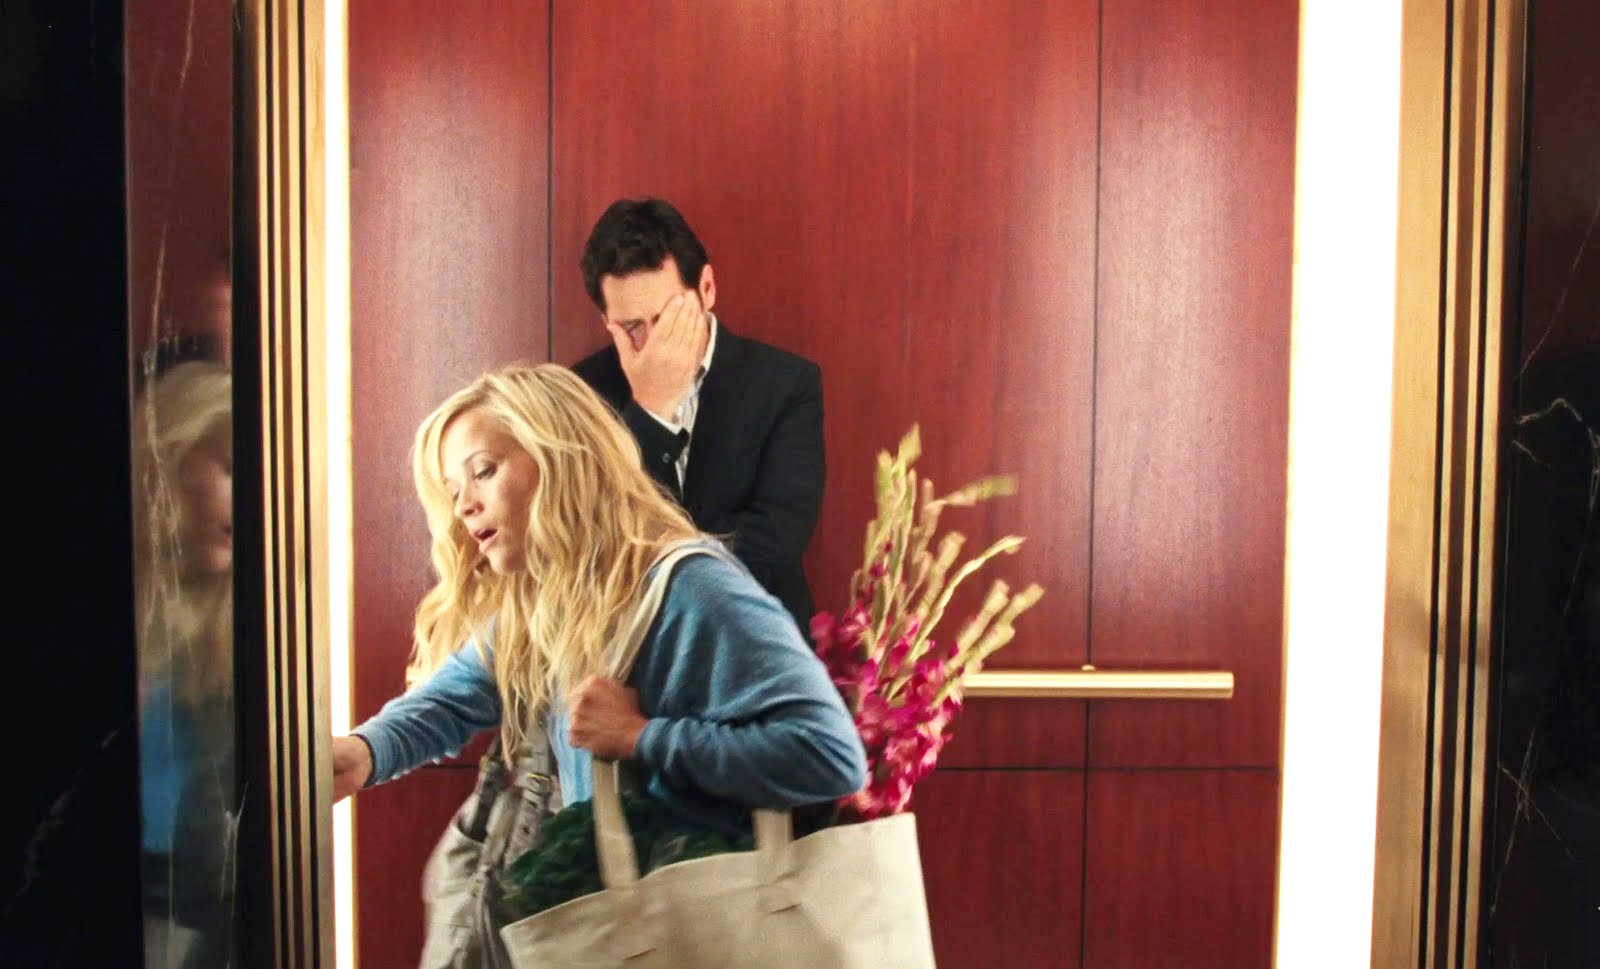 Reese Witherspoon stars as Lisa Jorgenson and Paul Rudd stars as George in Columbia Pictures' How Do You Know (2010)